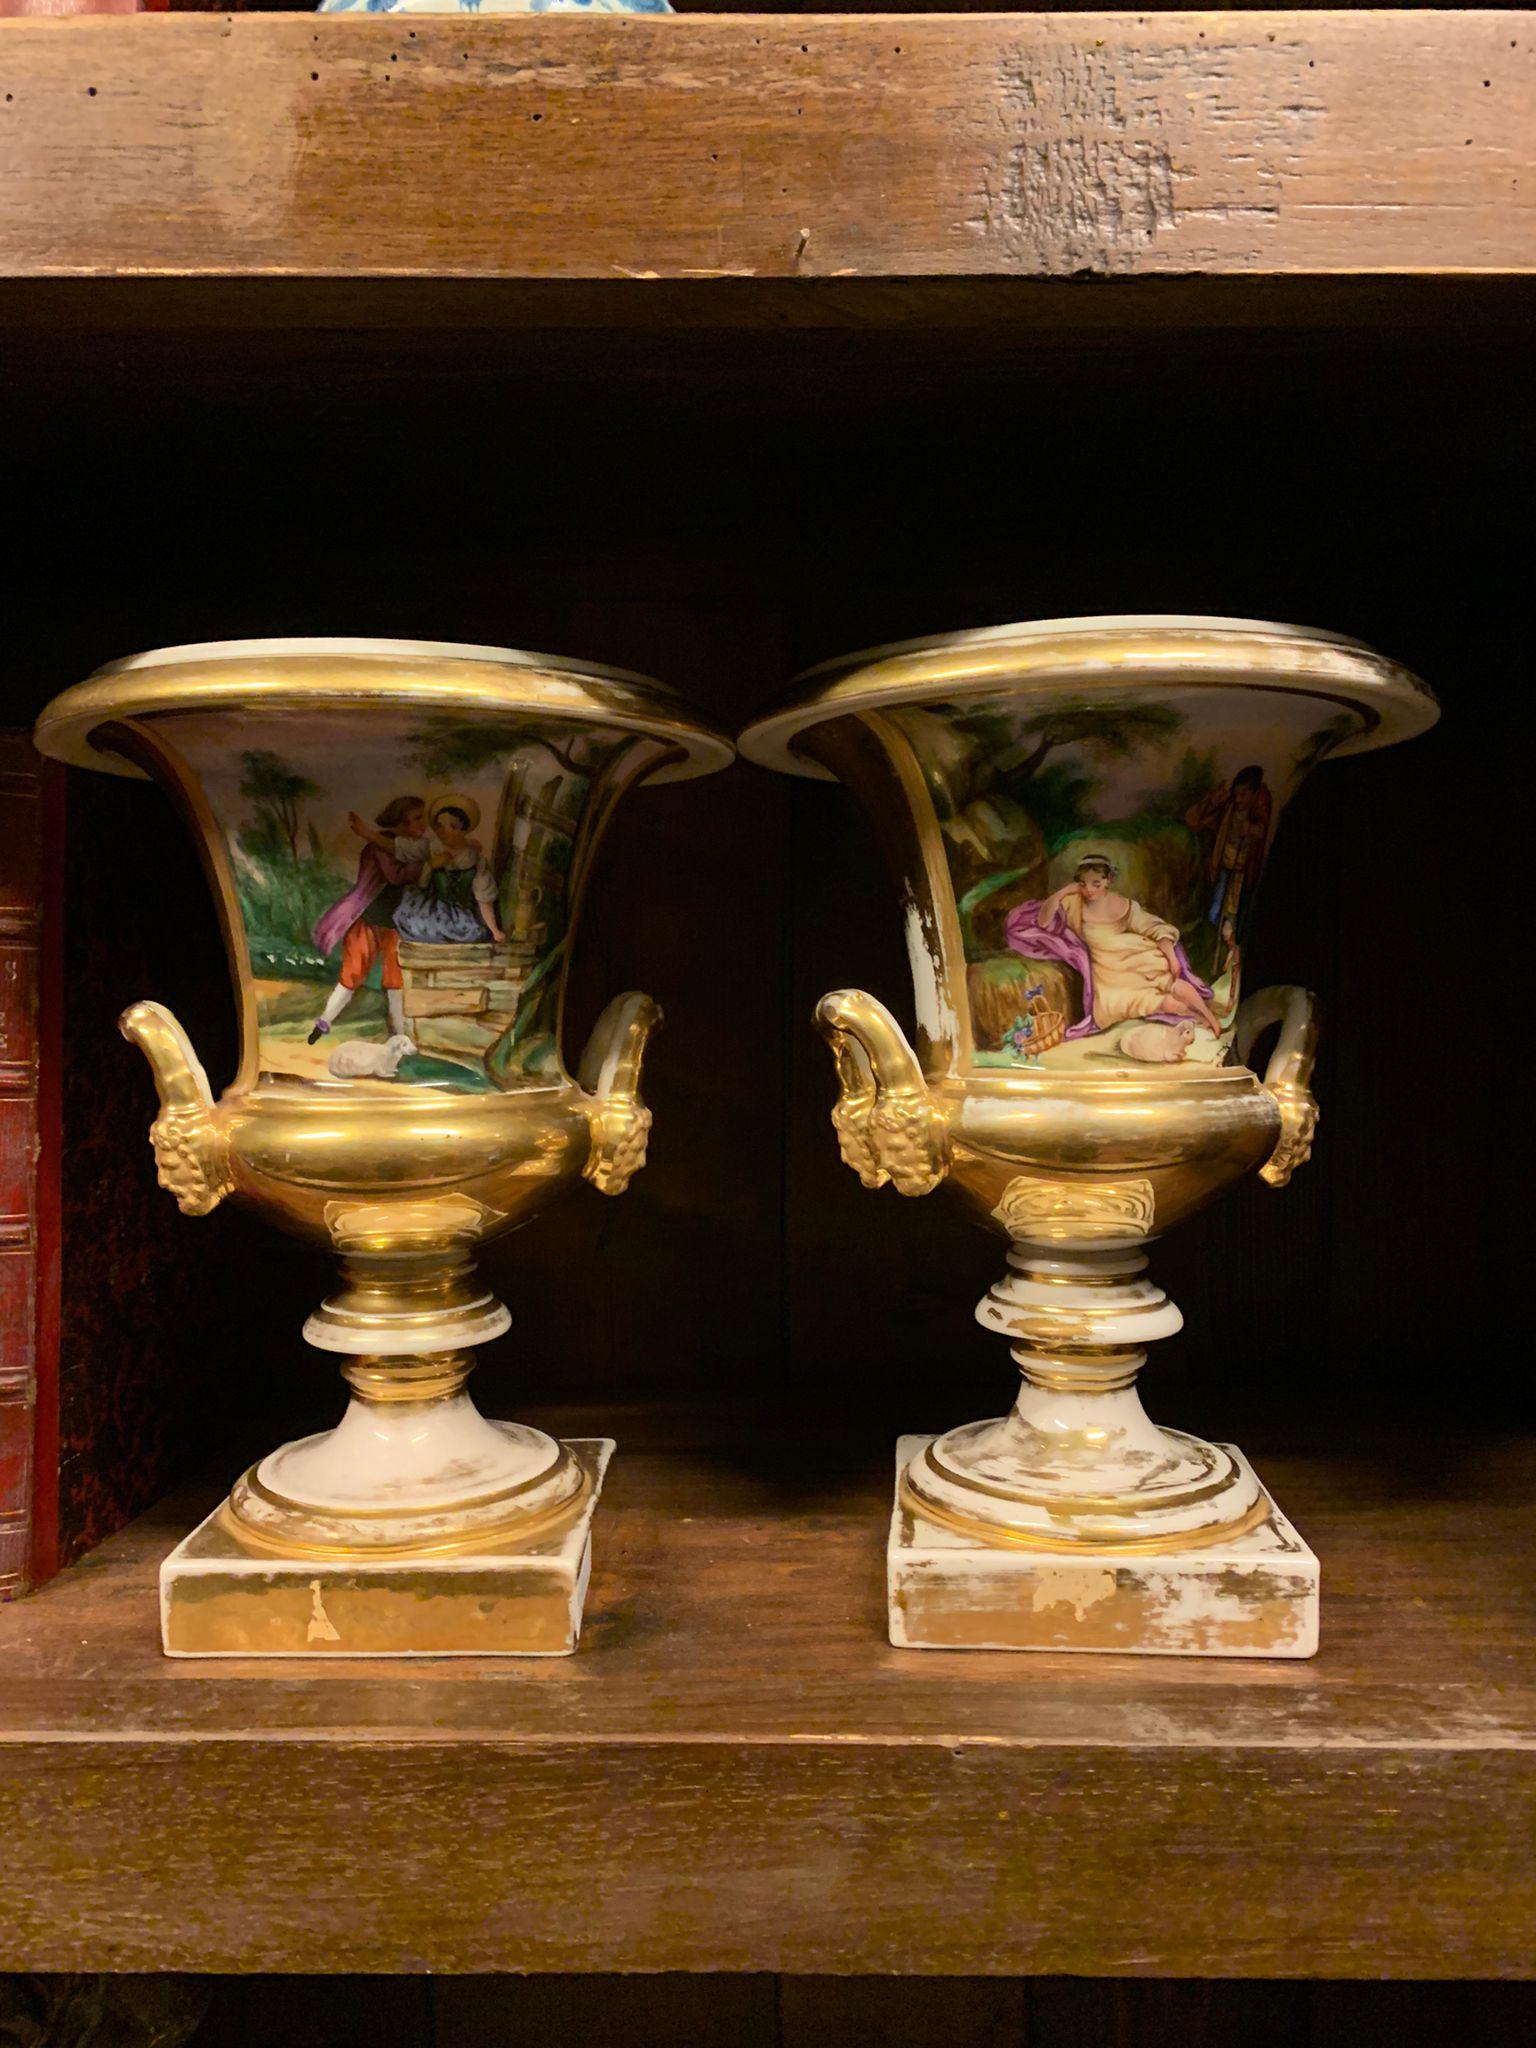 Ancient pair of fine porcelain vases, handmade and polychrome decorated with bucolic scenes and gilded edges, from Italy, 19th century, each measuring w 20 x h 29 x d 20 cm